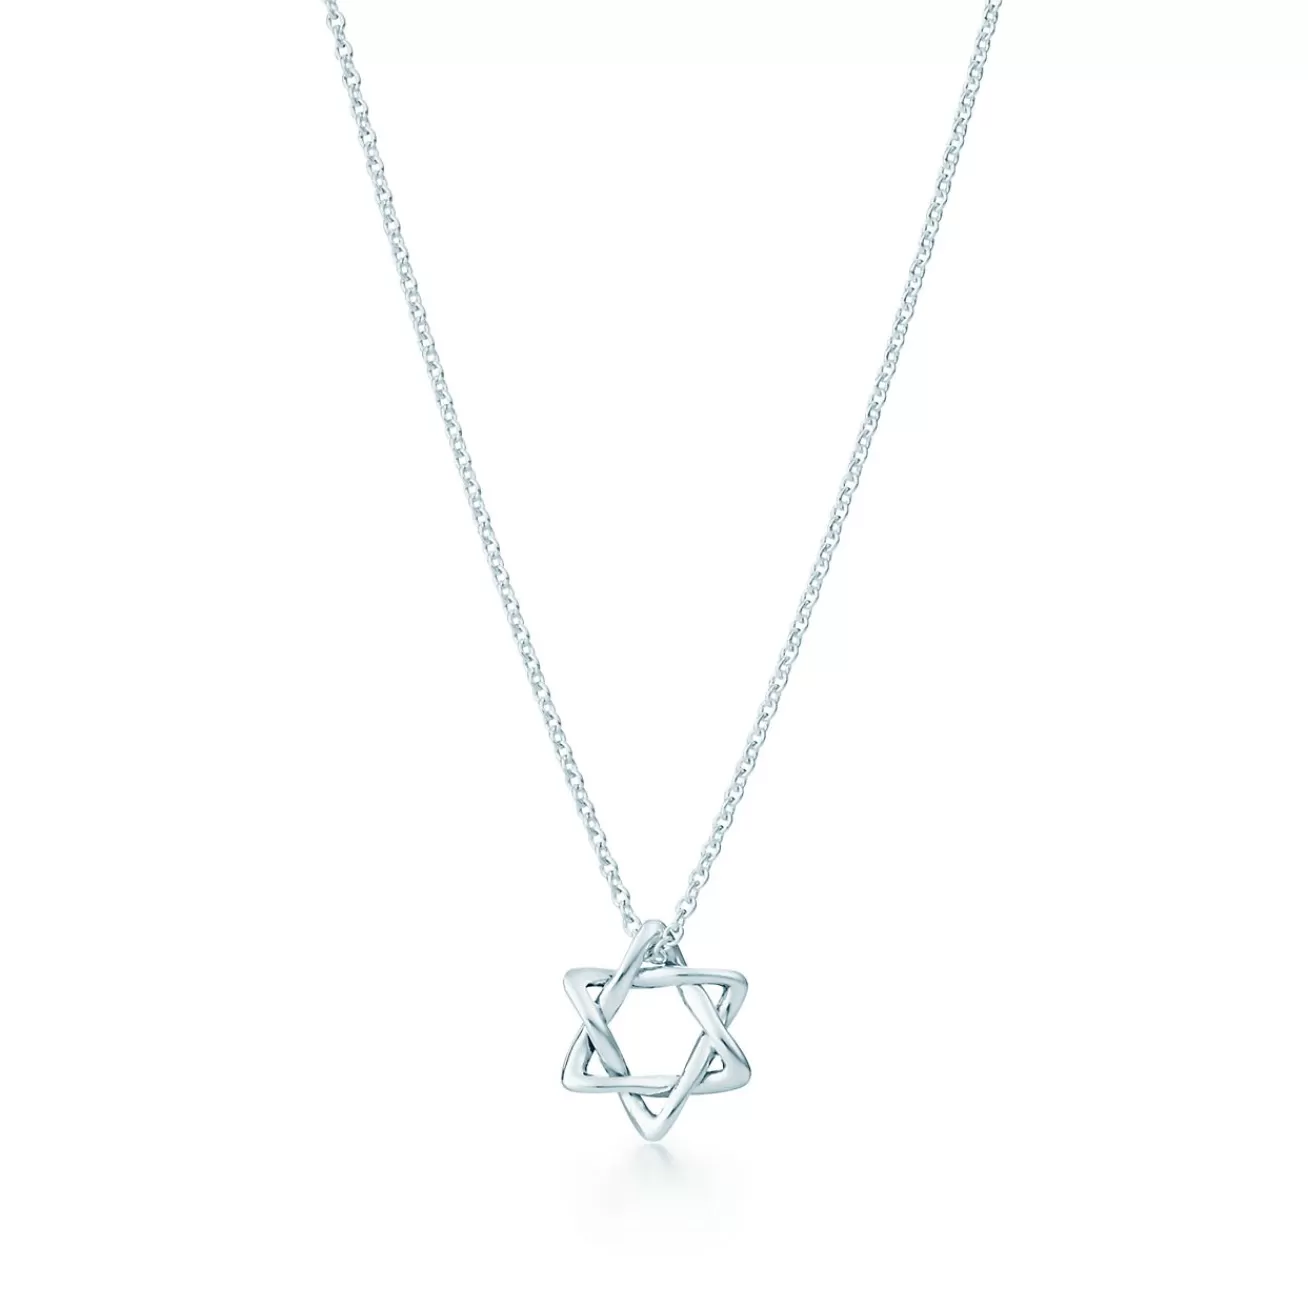 Tiffany & Co. Elsa Peretti® Star of David pendant in sterling silver, 12 mm wide. | ^ Necklaces & Pendants | Sterling Silver Jewelry